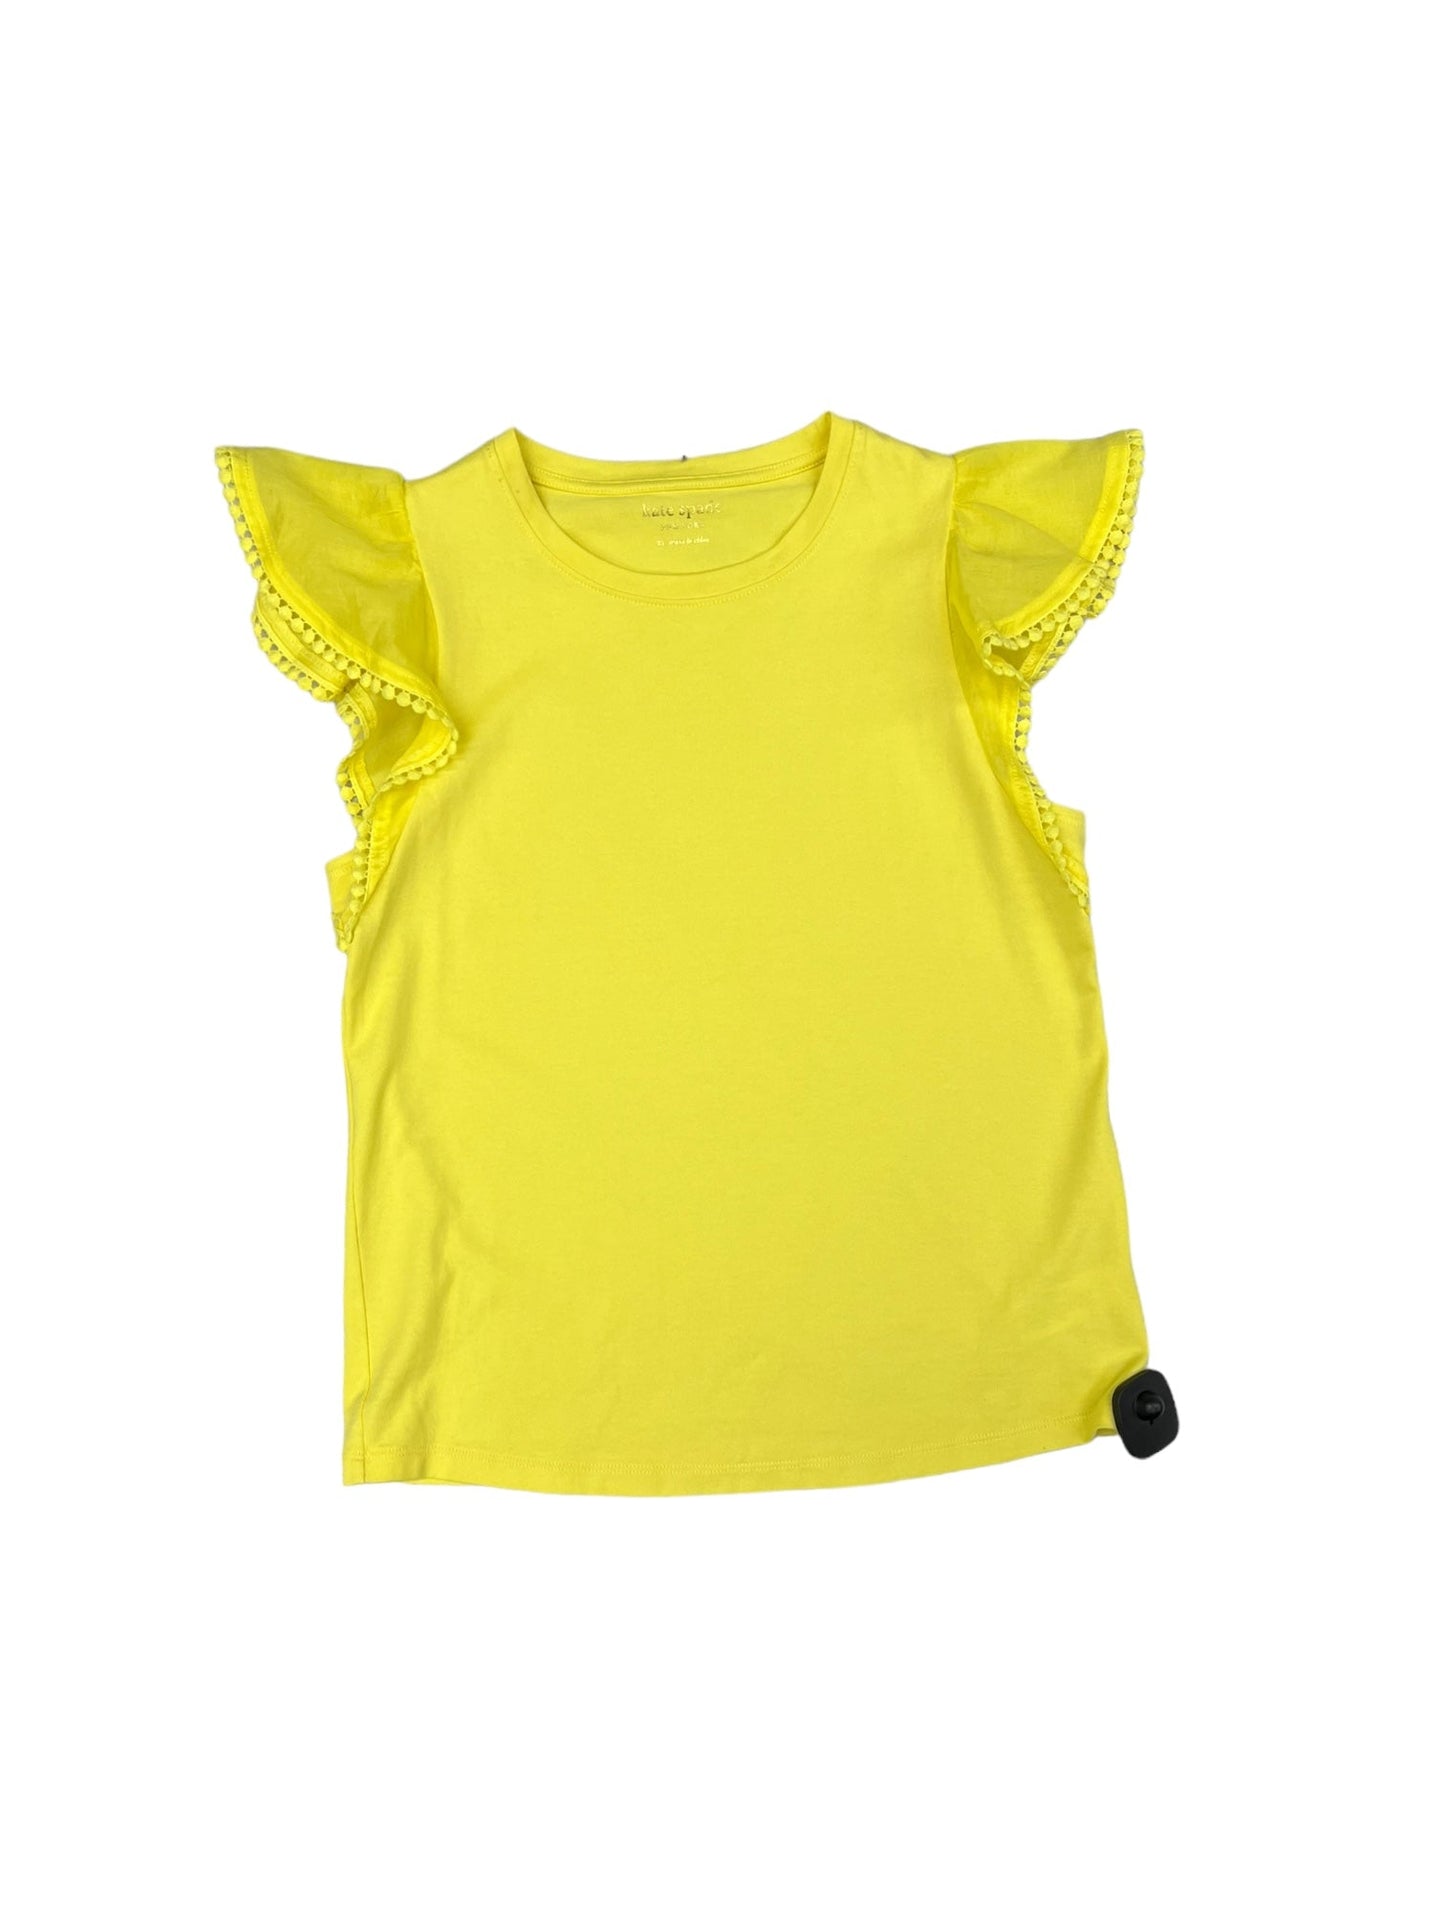 Yellow Top Short Sleeve Kate Spade, Size Xs